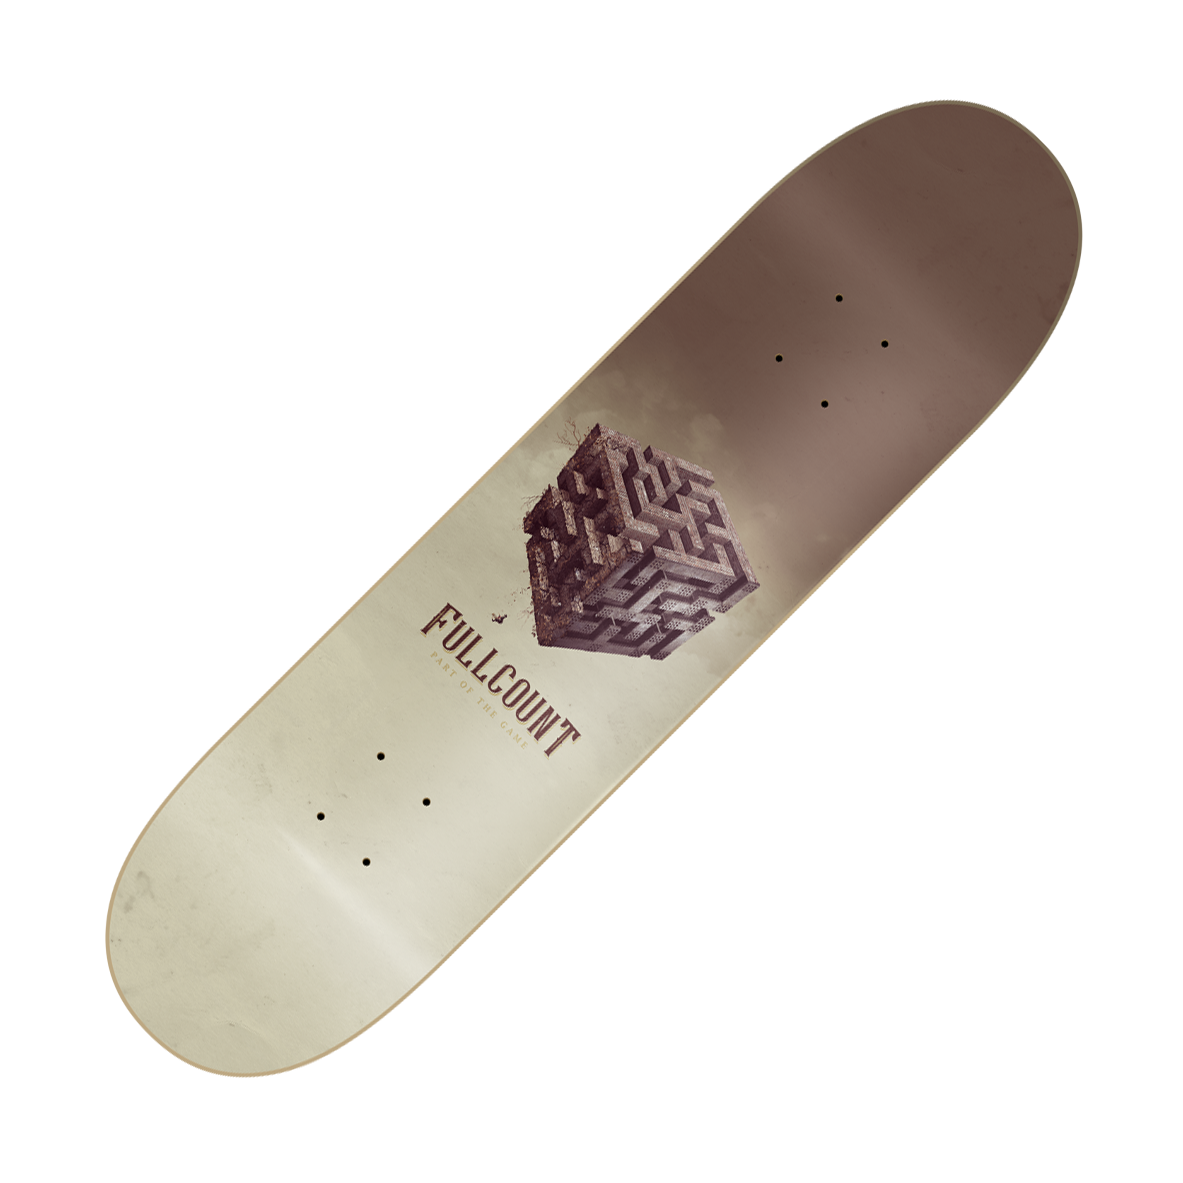 FULLCOUNT - "Part Of The Game" (Skateboard Deck)